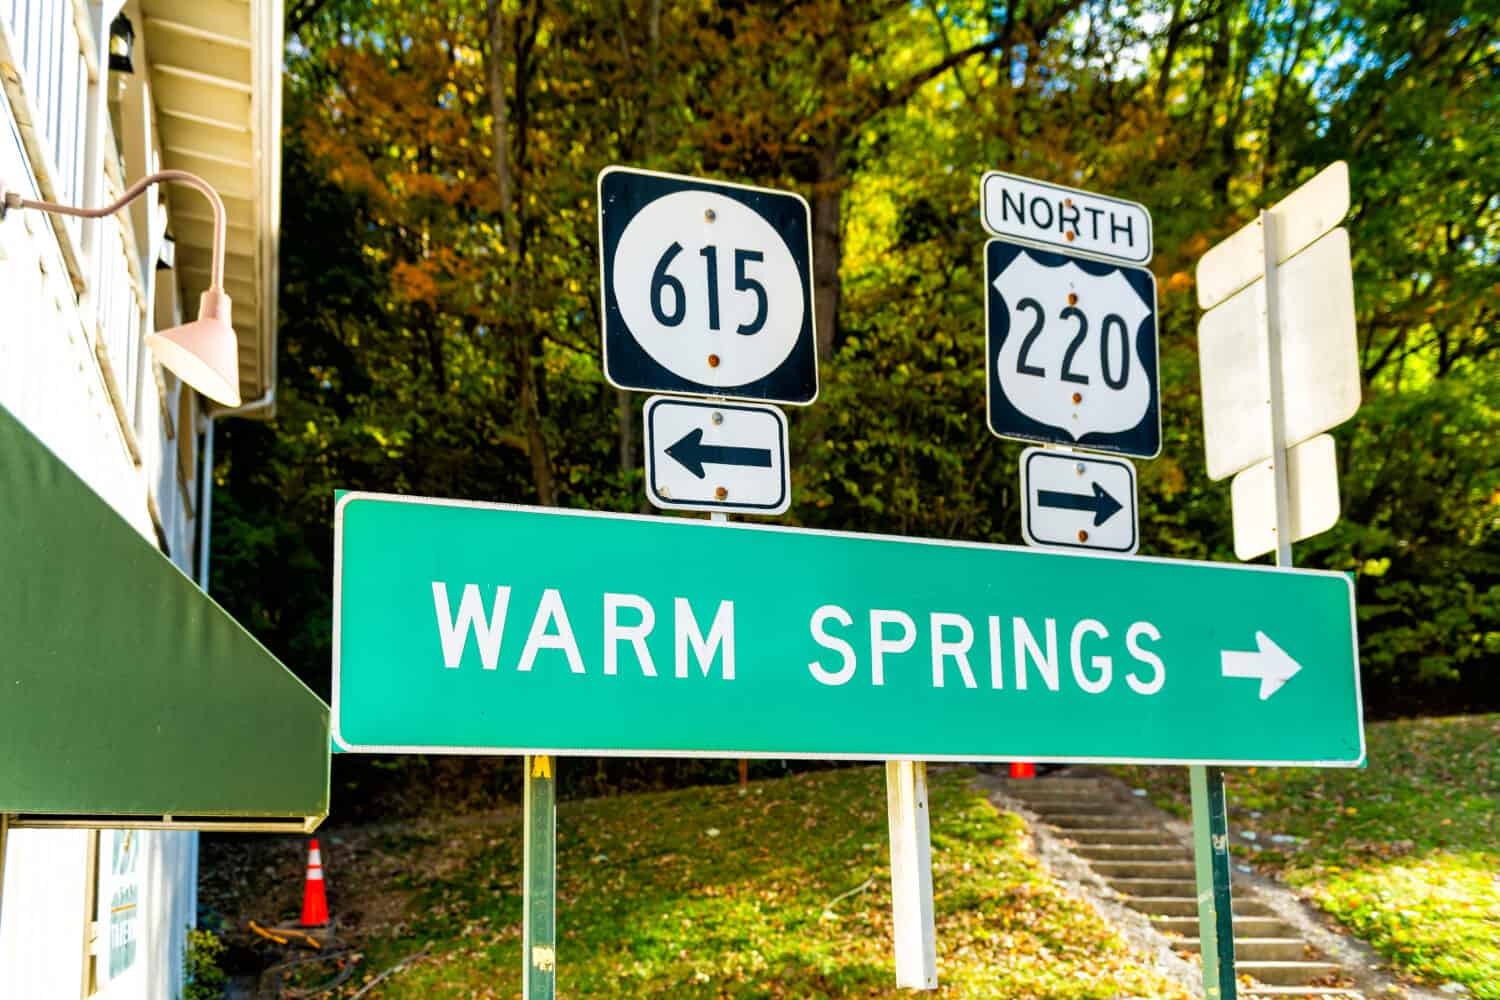 Hot Springs, USA downtown town village city in Virginia countryside with street road highway 615 and 220 directional sign for Warm Springs and arrow